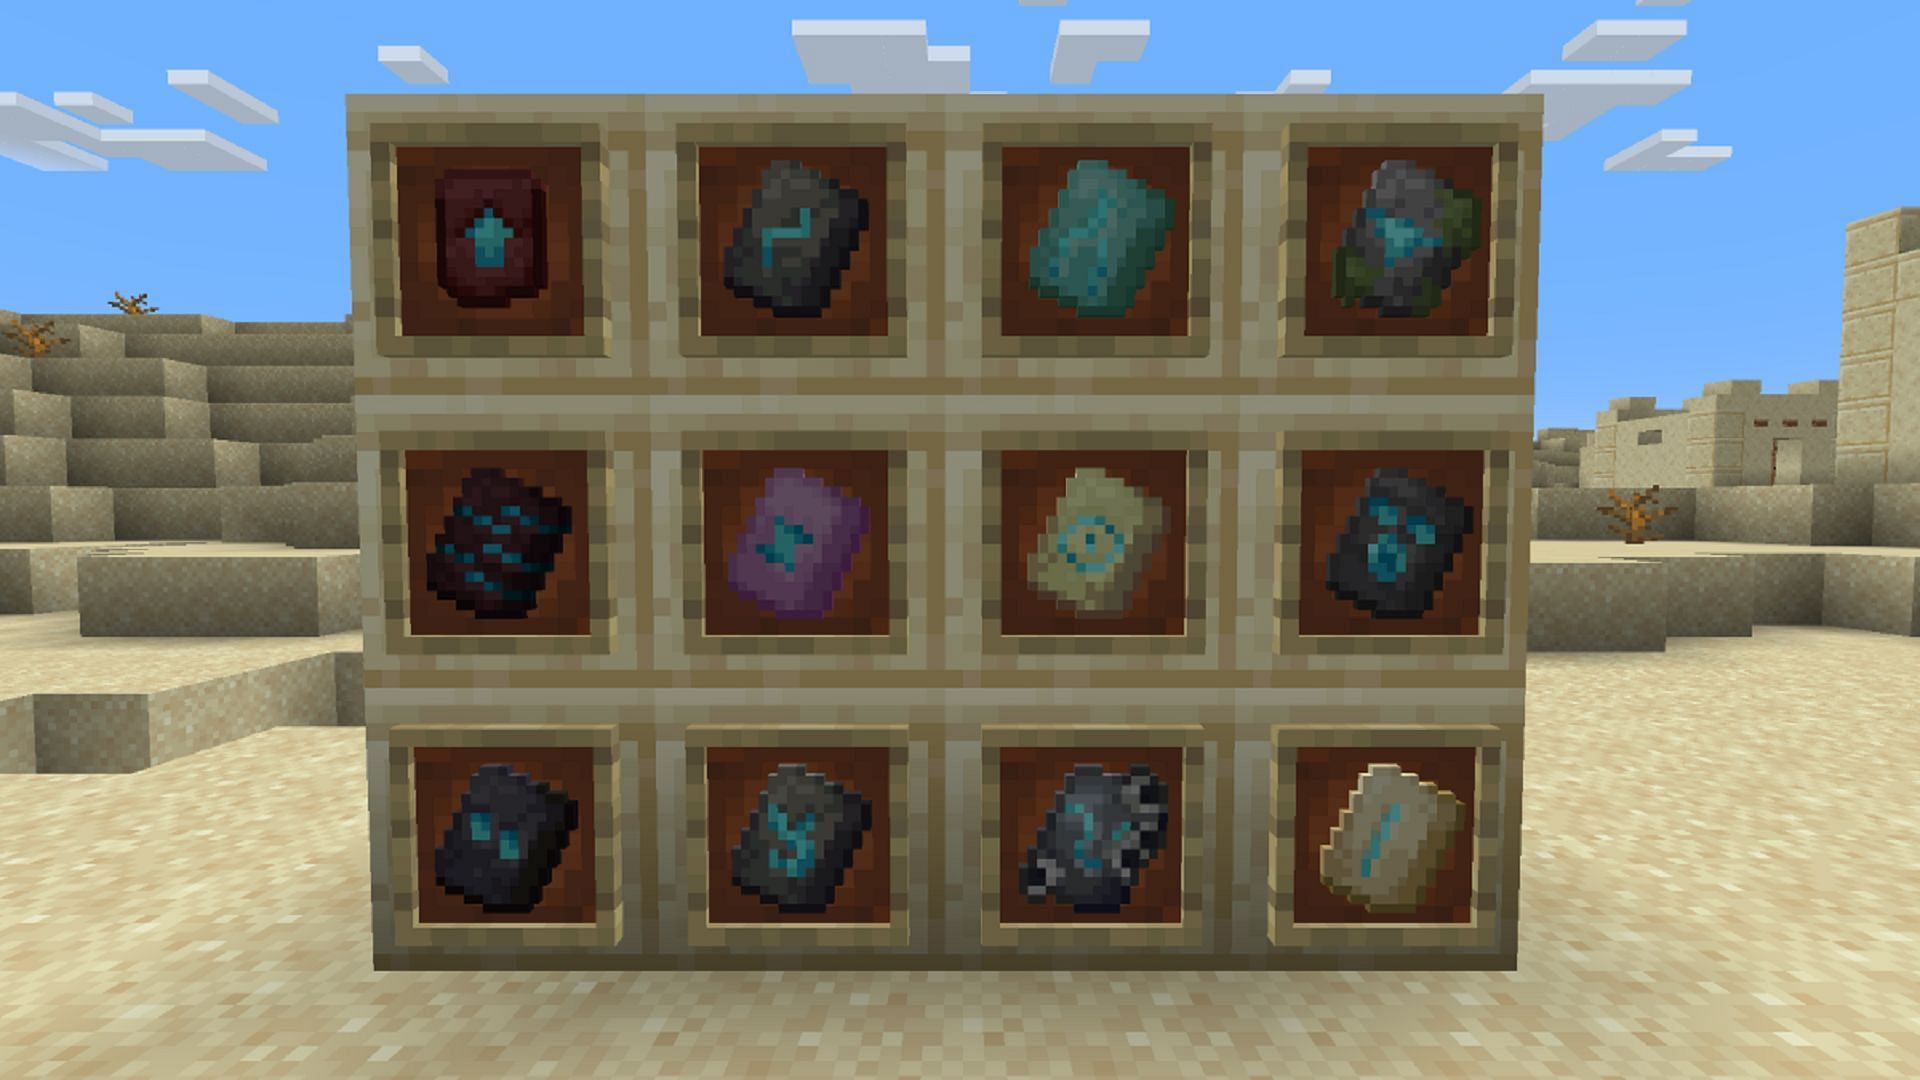 Smithing templates facilitate armor trimming in Minecraft (Image via Mojang)